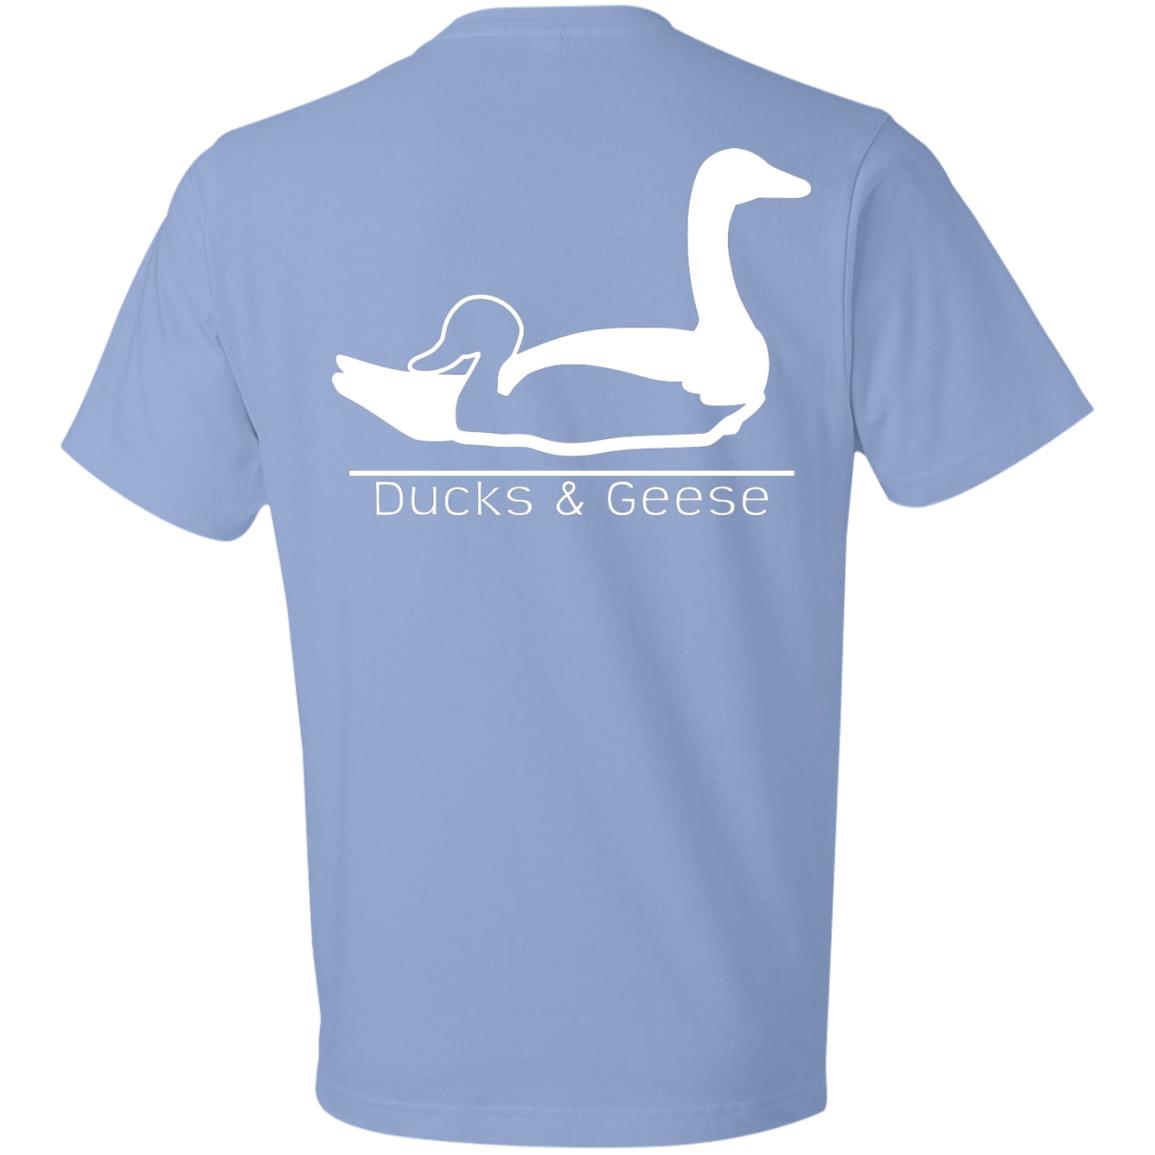 Ducks and geese t shirt